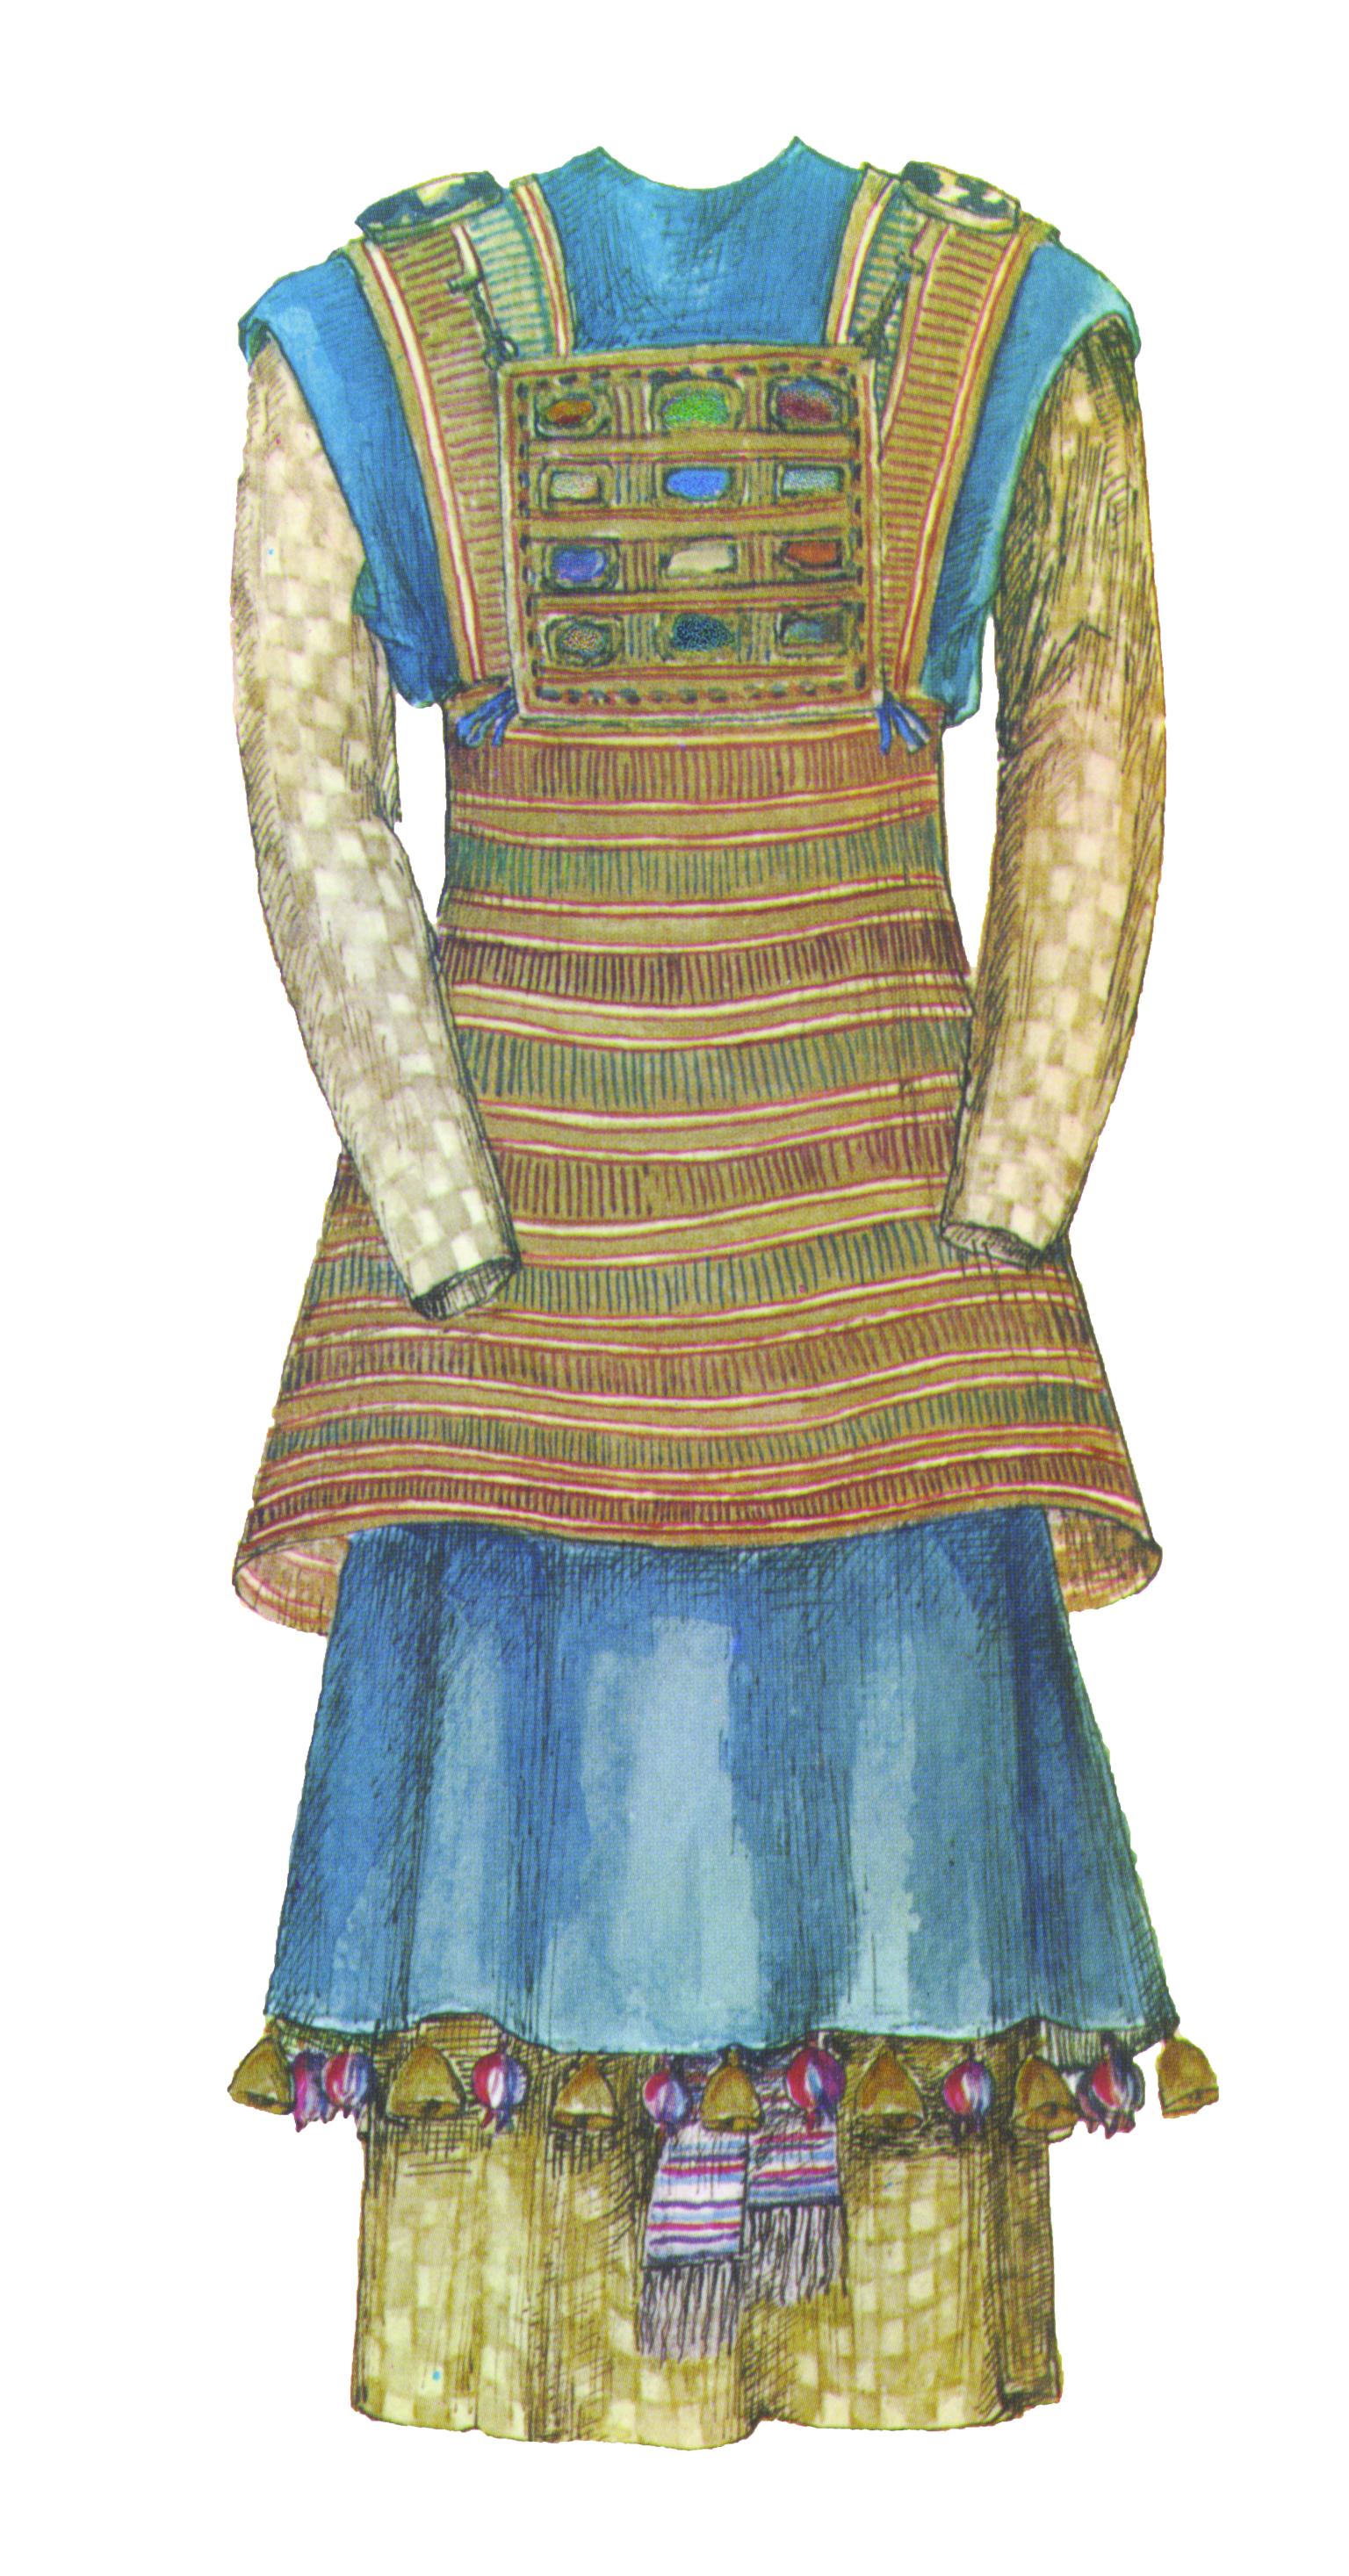 Drawing of outfit consisting of a linen embroidered apron with hem made of alternating pomegranates and bells, undershirt, and breastplate with twelve stones in center. 